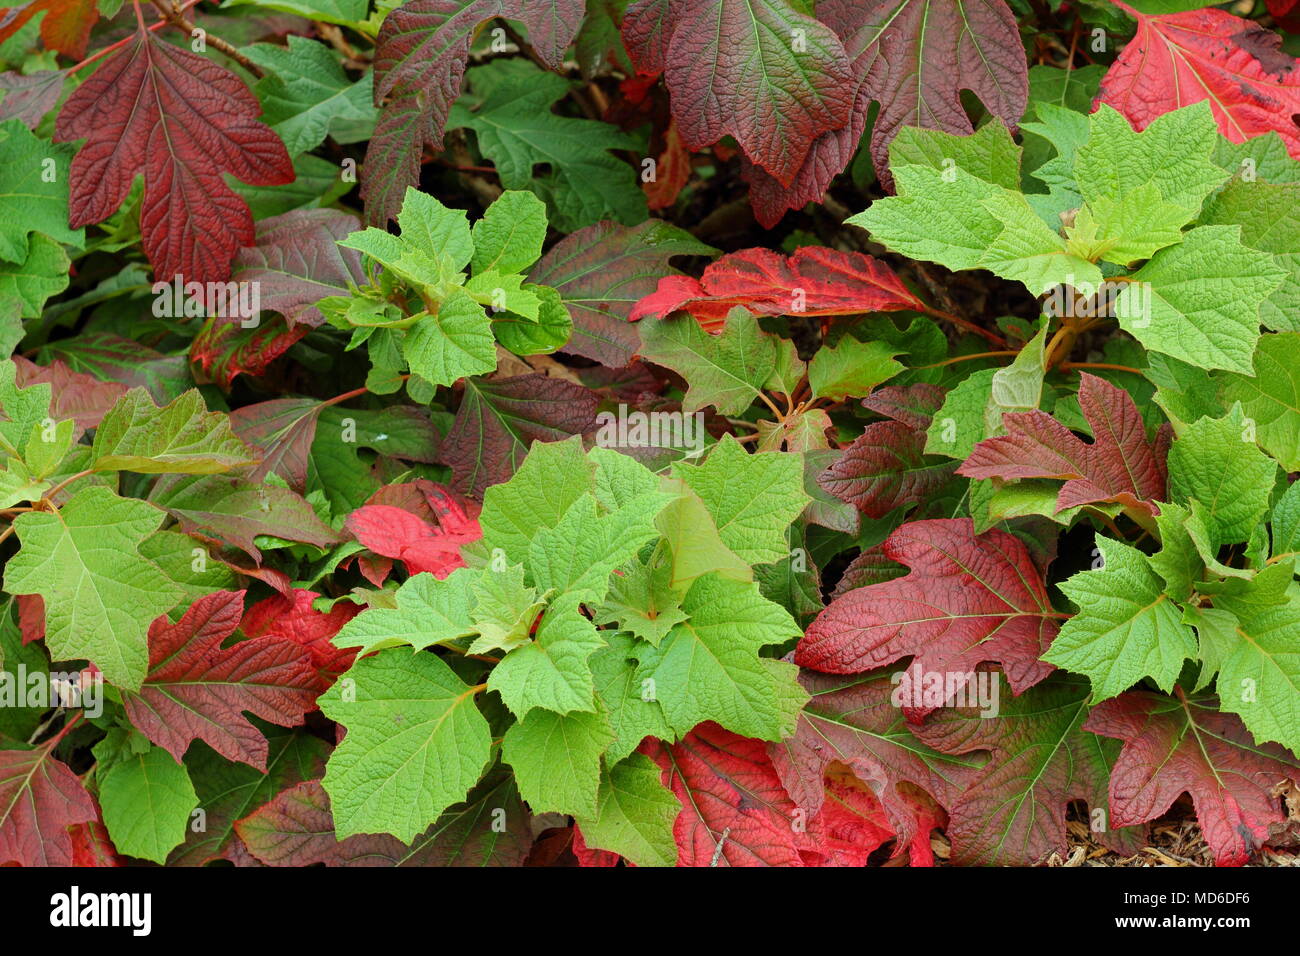 Hydrangea quercifola 'Snow Queen' leaves showing autumnal tints in an English garden border, UK Stock Photo